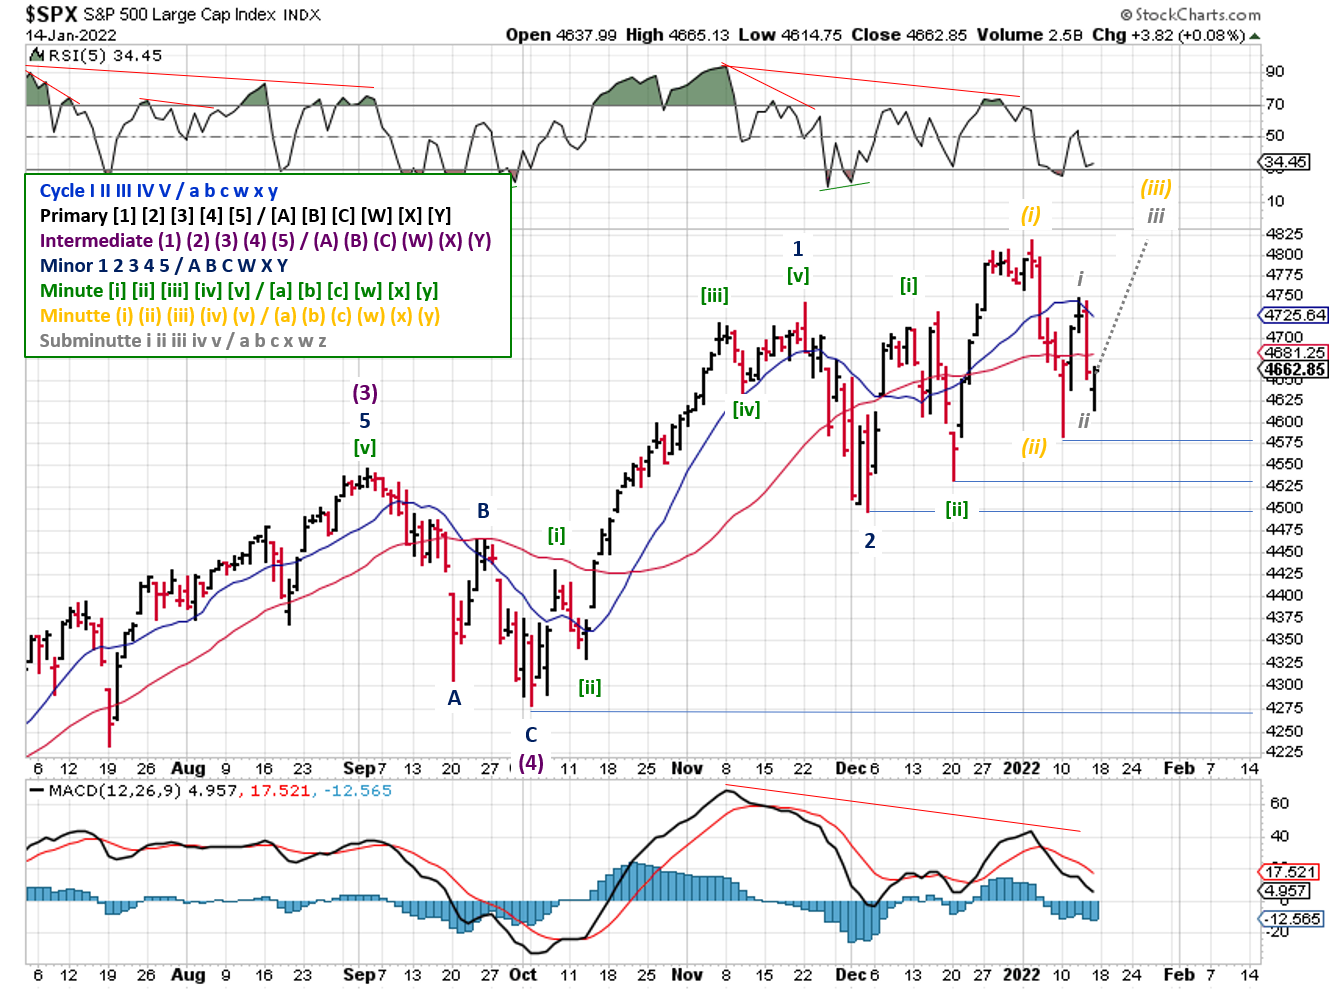 Technical analysis of daily SPX prices